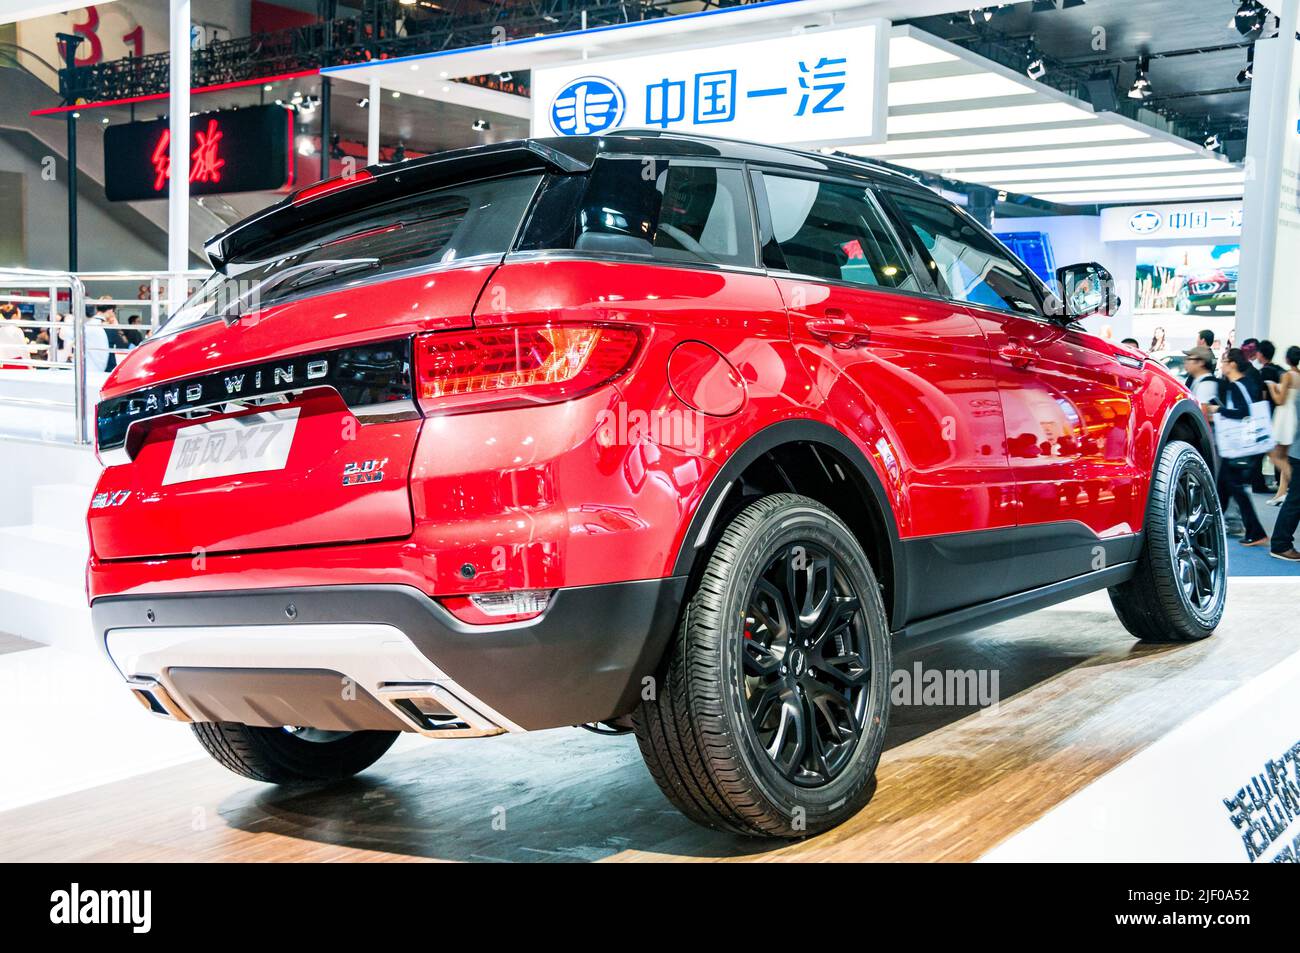 The Landwind X7 a copy of the Range Rover Evoque on display at the 2014 Guangzhou Auto Show. Stock Photo